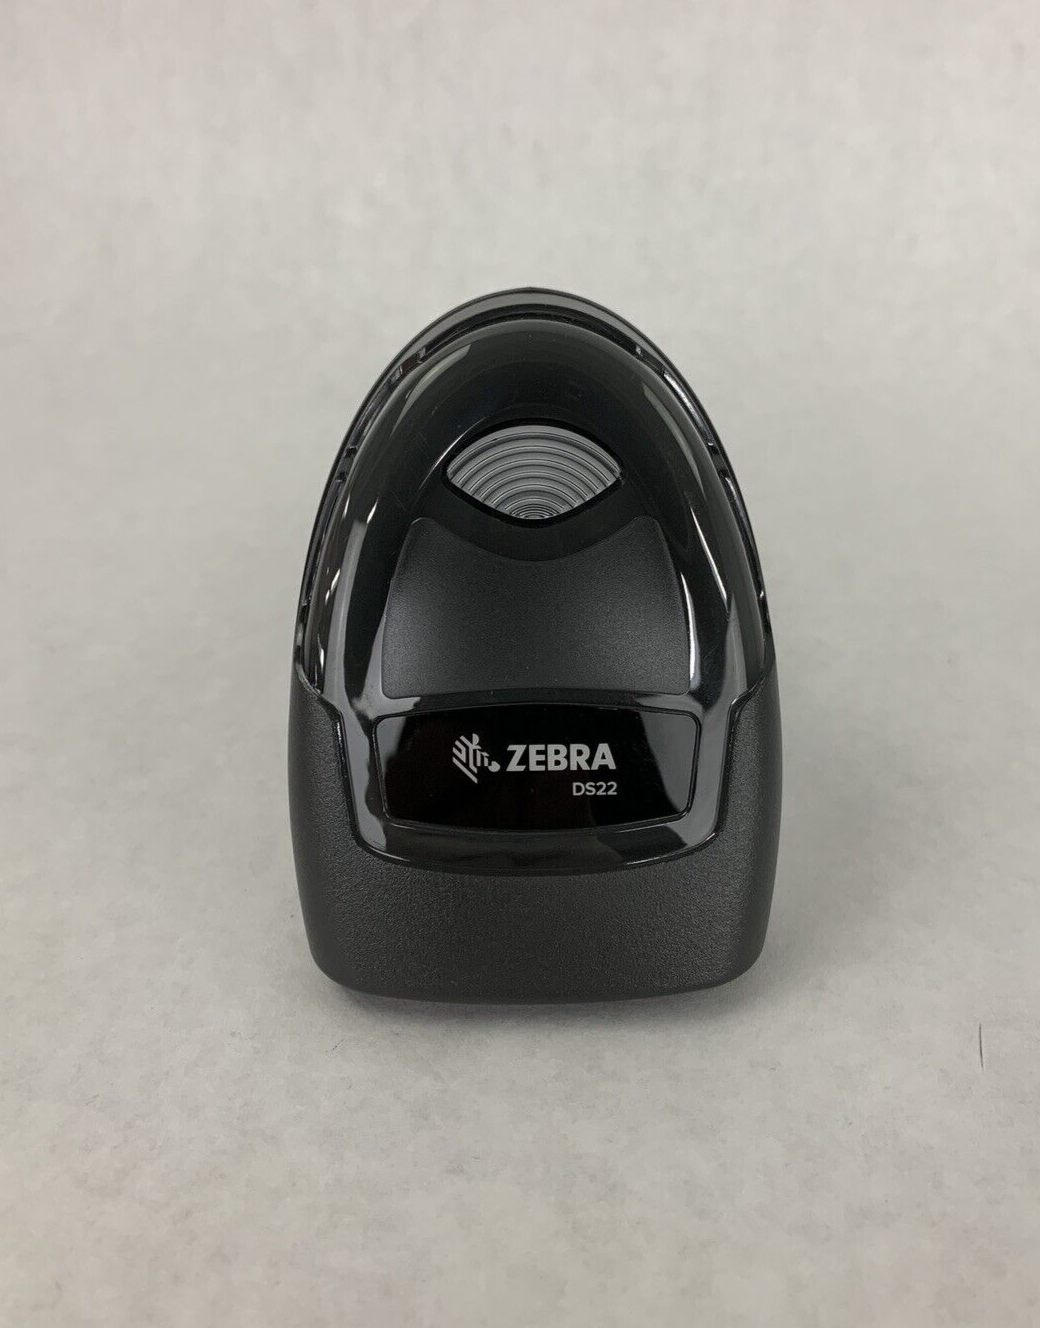 Zebra DS2208-SR00007ZZWW USB Barcode Scanner No Cable Tested